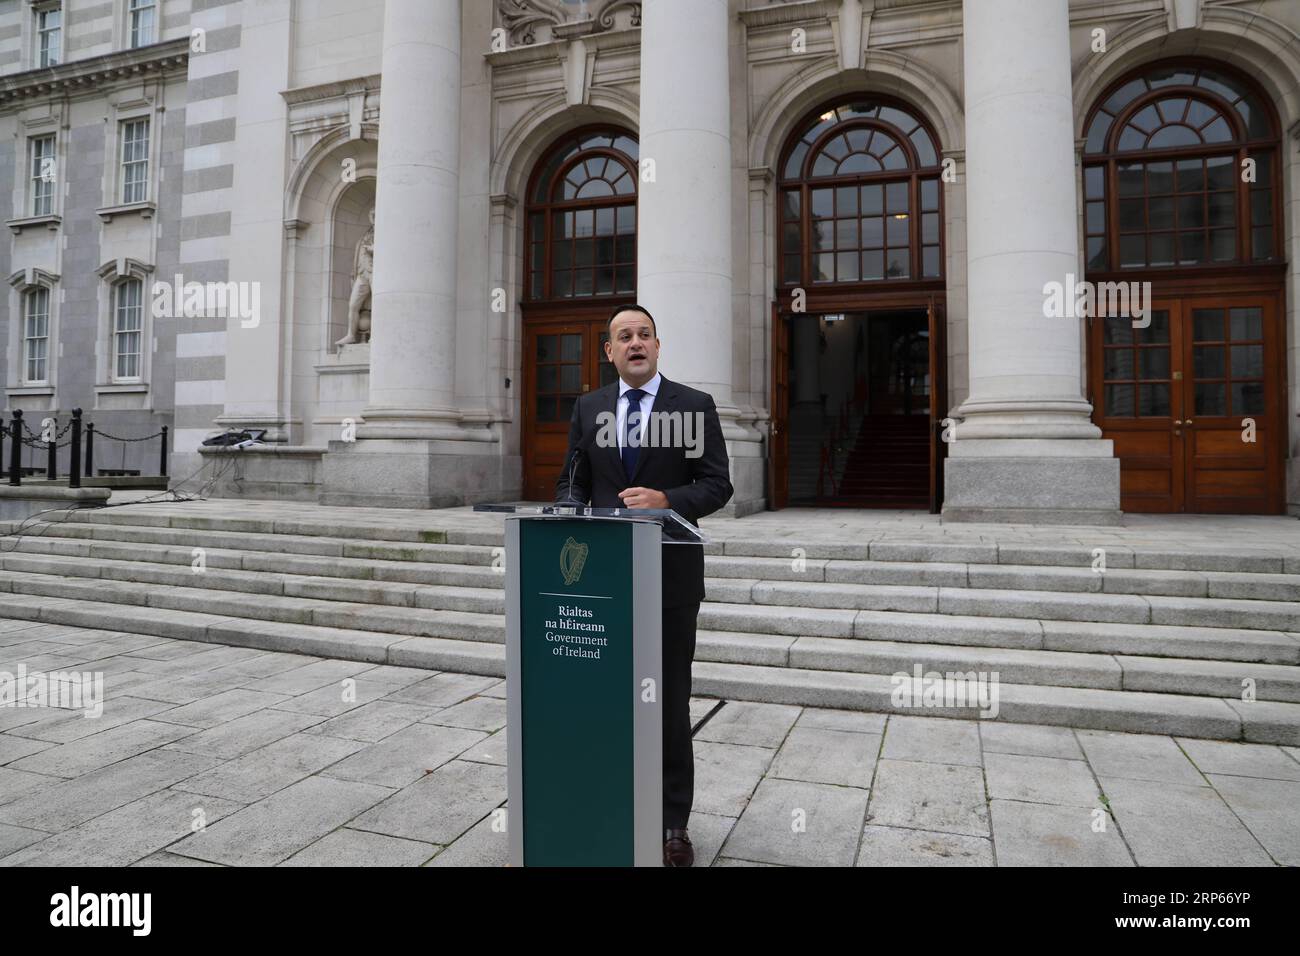 (190104) -- DUBLIN, Jan. 4, 2019 (Xinhua) -- Irish Prime Minister Leo Varadkar addresses a press briefing at Government Buildings in Dublin, Ireland, Jan. 3, 2019. Irish Prime Minister Leo Varadkar said that he held a phone conversation with German Chancellor Angela Merkel on Thursday morning during which both leaders agreed that no reassurances or guarantees sought by the British side should contradict what has been agreed in the Withdrawal Agreement. (Xinhua) IRELAND-DUBLIN-PM PRESS BRIEFING PUBLICATIONxNOTxINxCHN Stock Photo